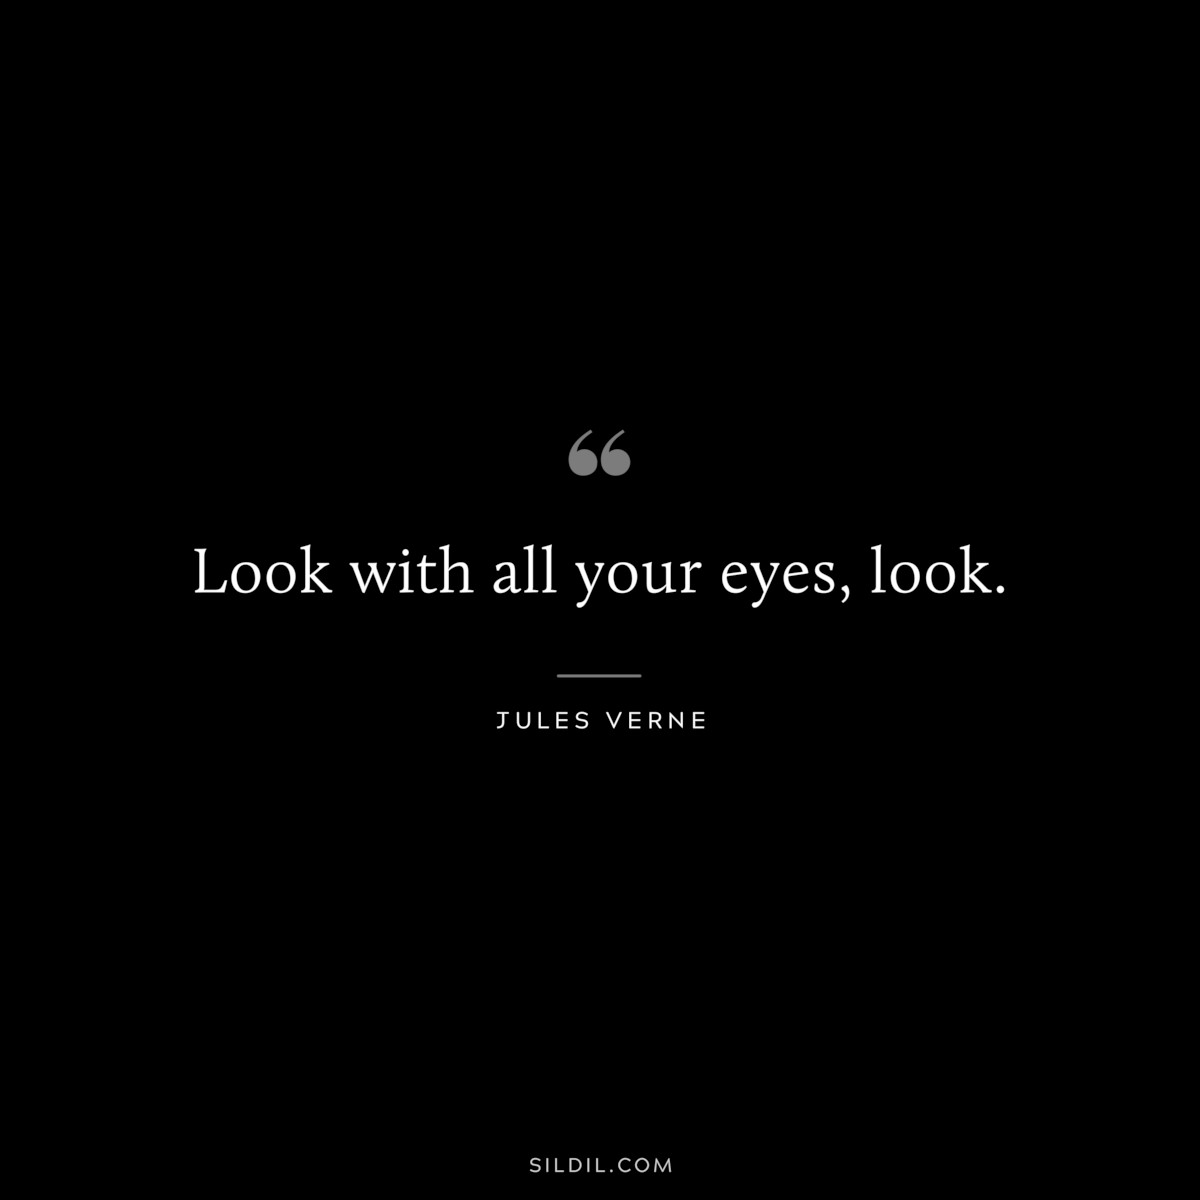 Look with all your eyes, look.